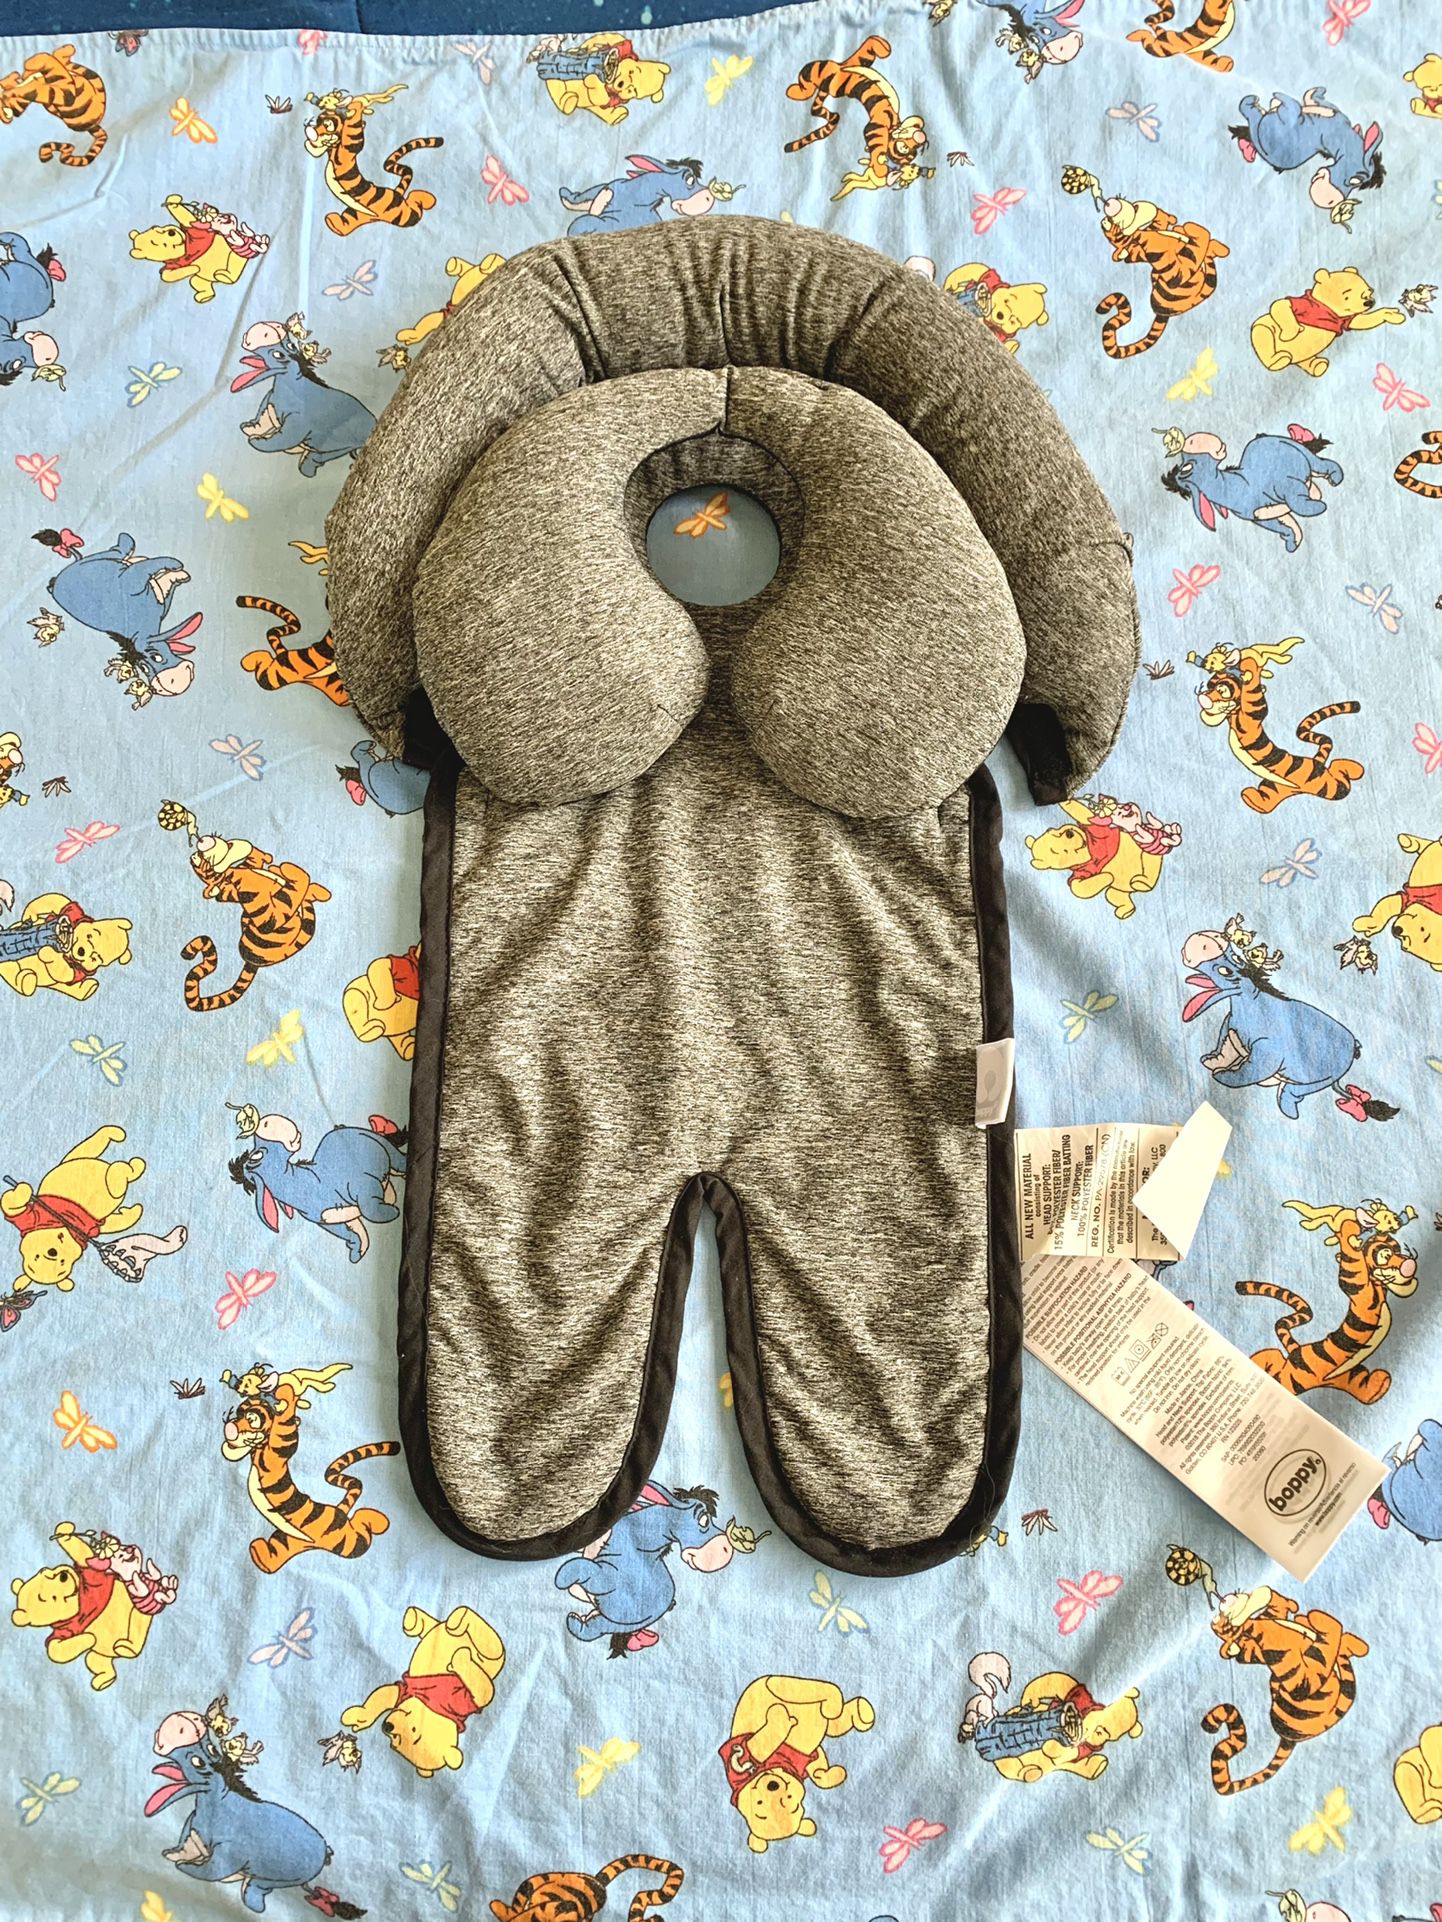 Boppy Insert For Head And Neck Support For Newborns. 